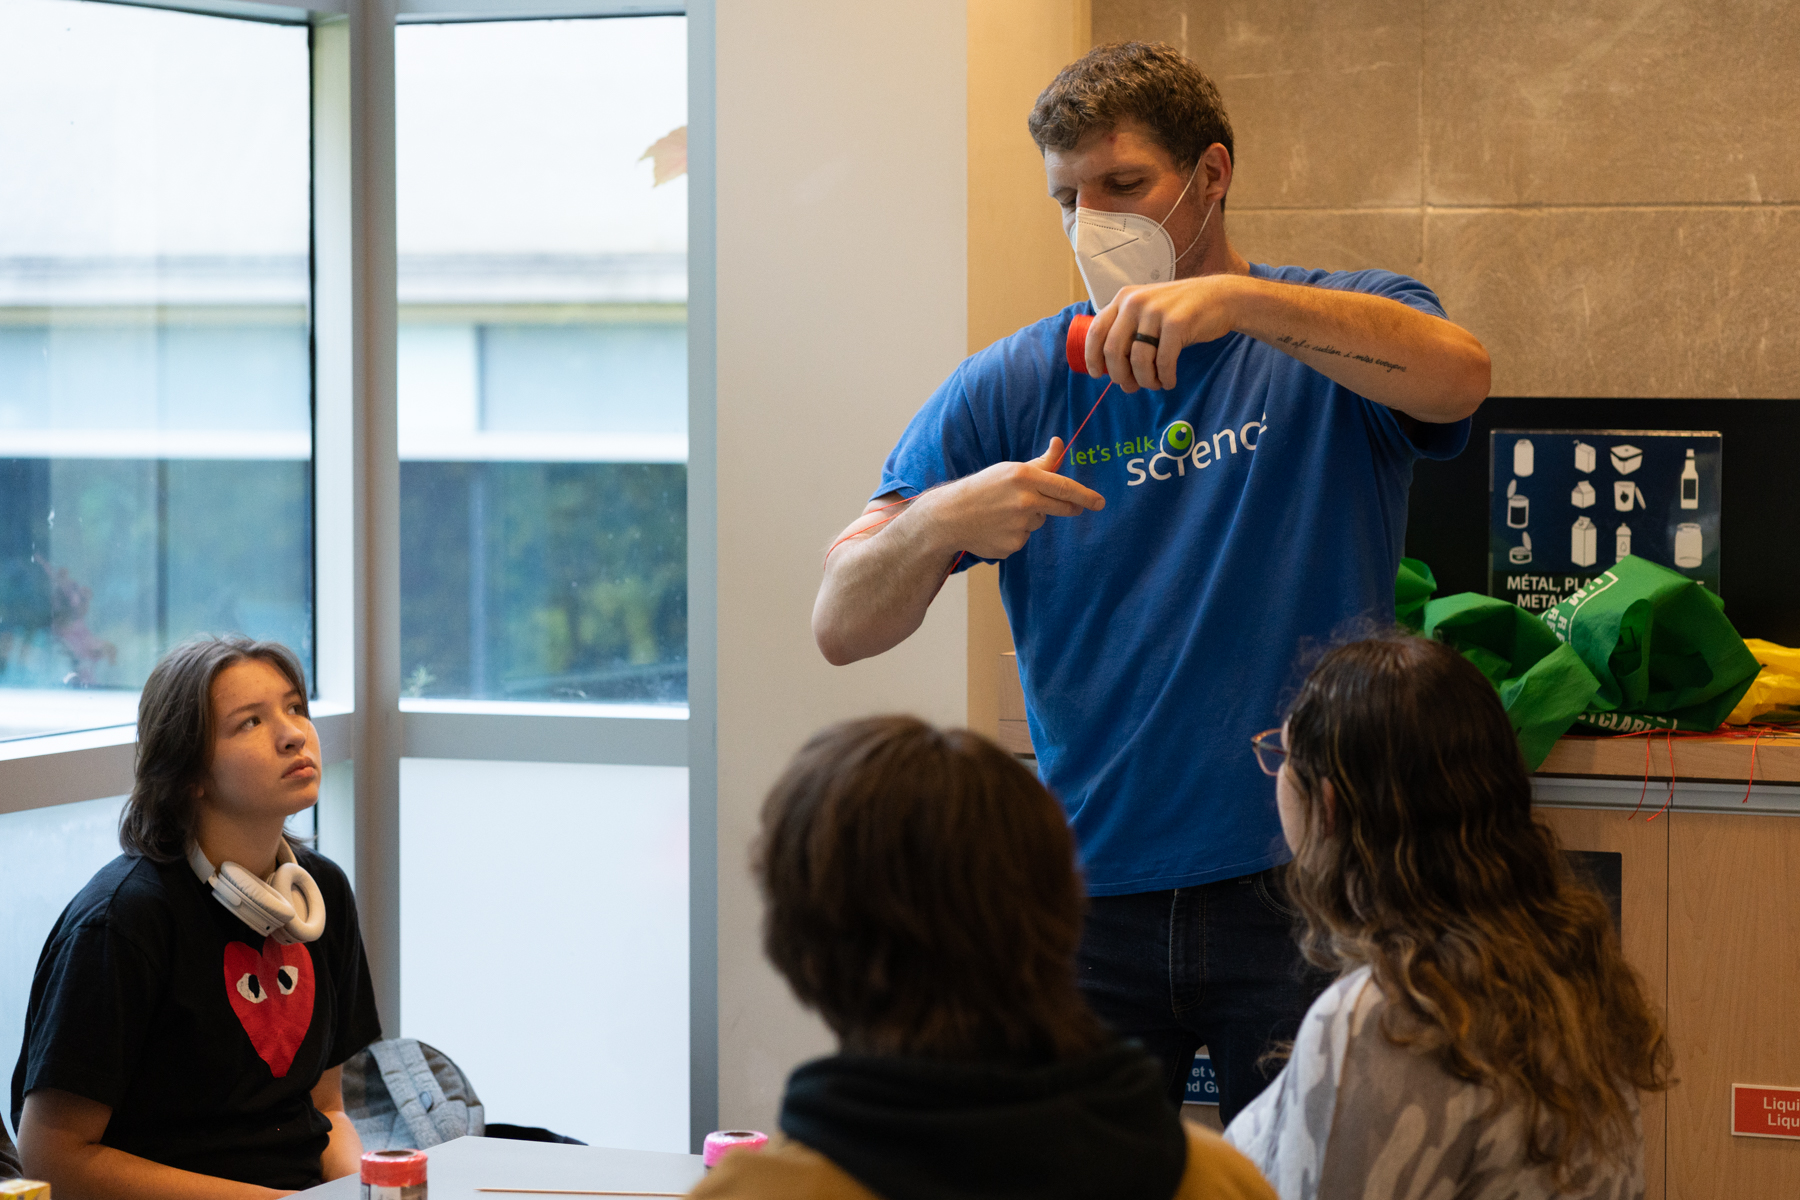 Let's Talk Science Volunteer in a blue shirt demonstrating an activity involving pink thread to attentive students